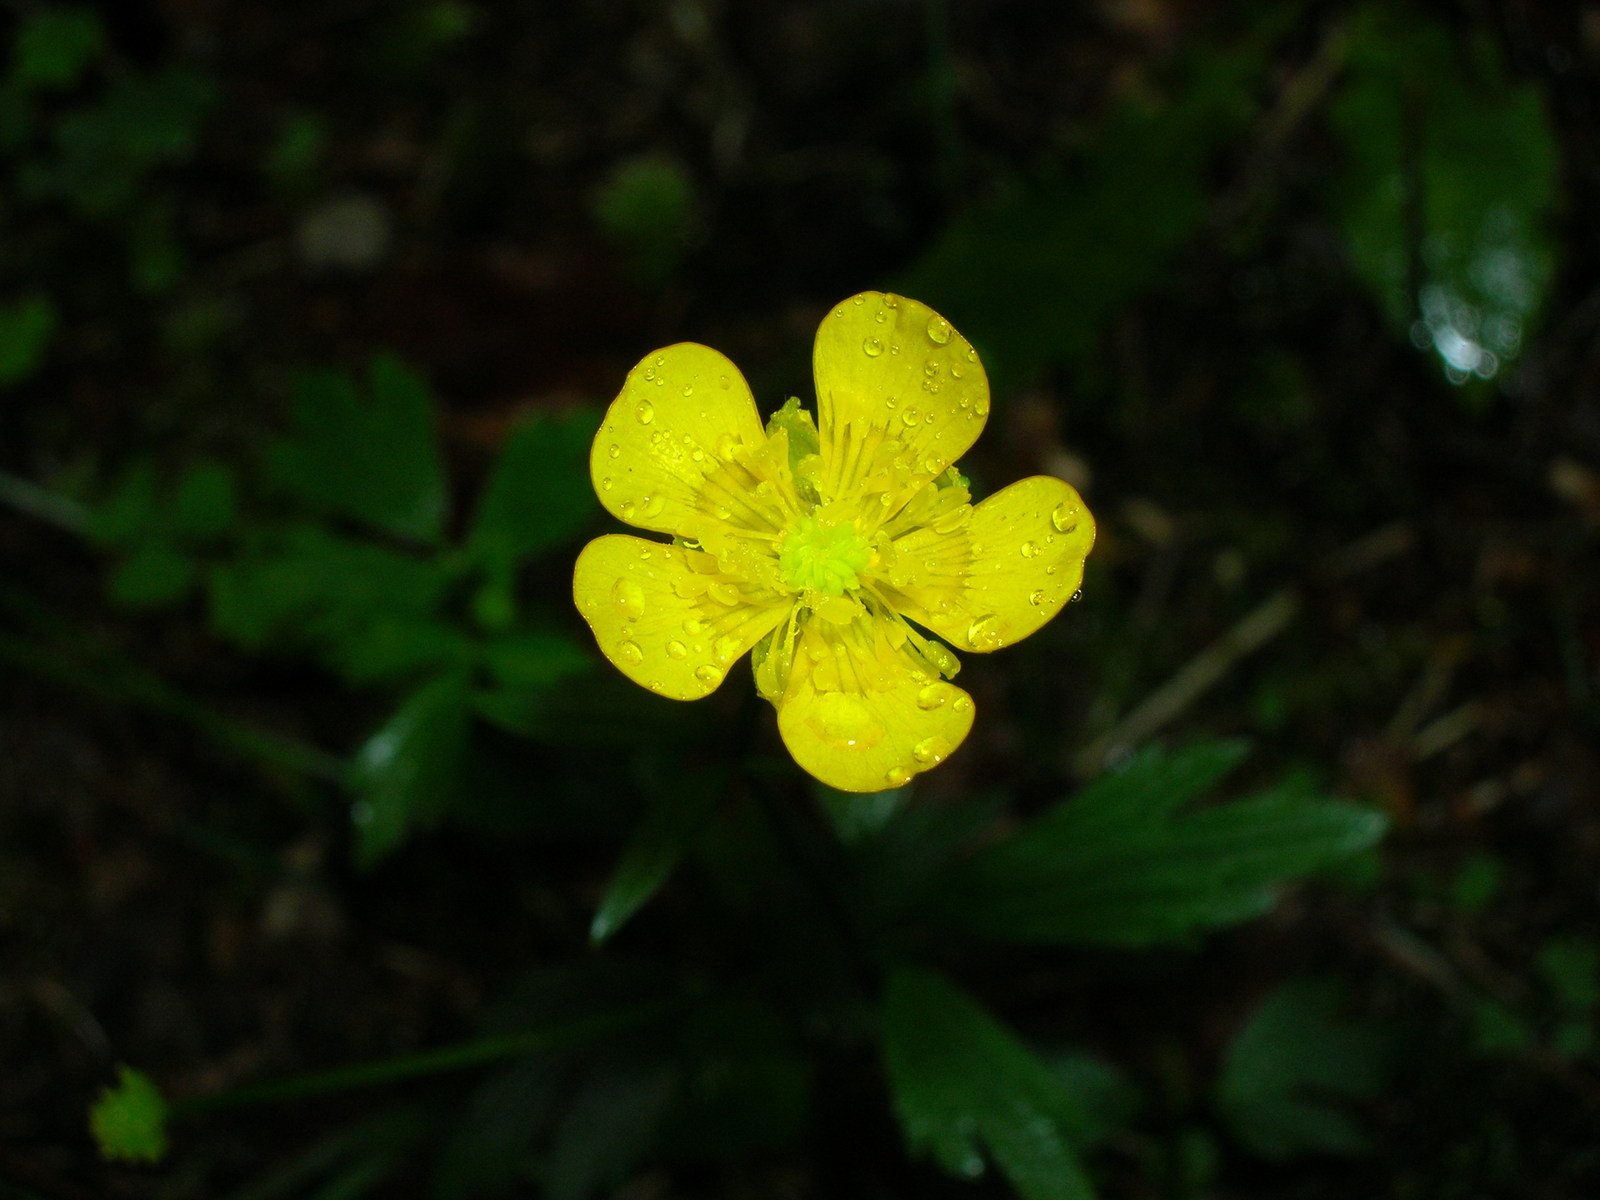 the bright yellow flower is on the green plant